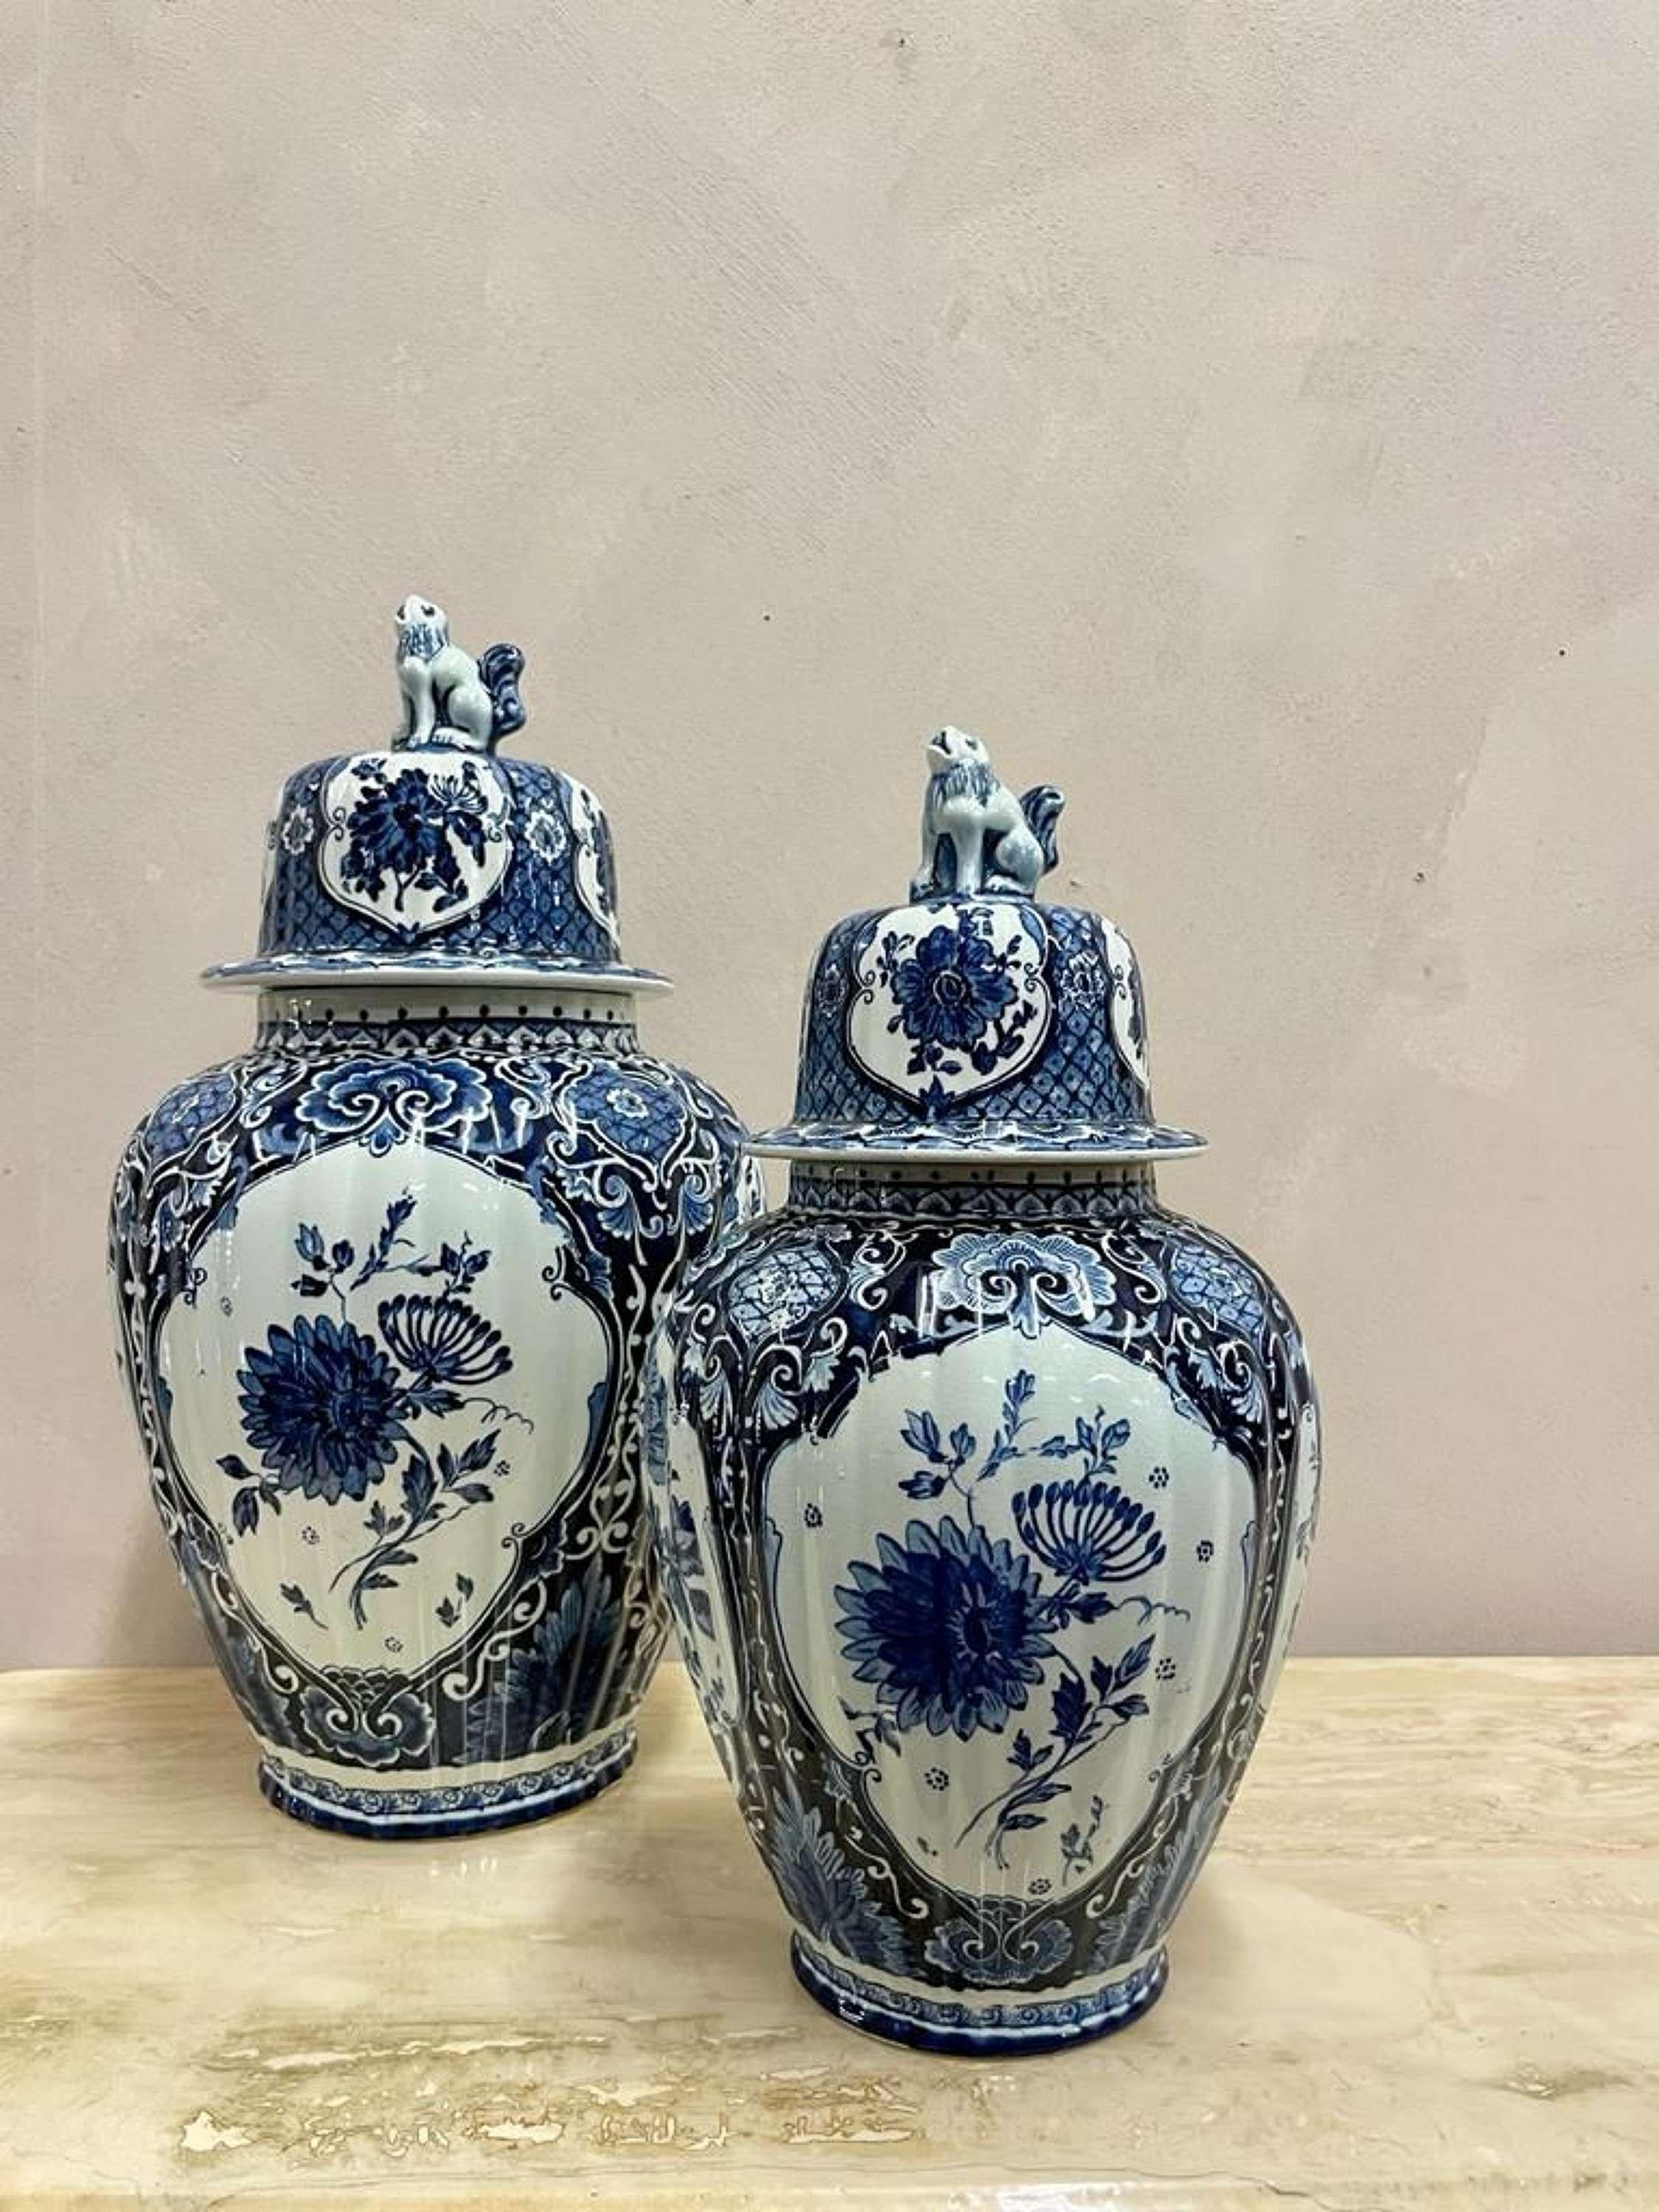 A 'his and hers' sized pair of late 19th century Dutch Delft Ginger Jars, by Petrus Regout, Maastricht.
Domed covers are mounted by typical Foo Dogs.
These jars date to after 1879, when the firm starte using the image of a sphynx as a logo and